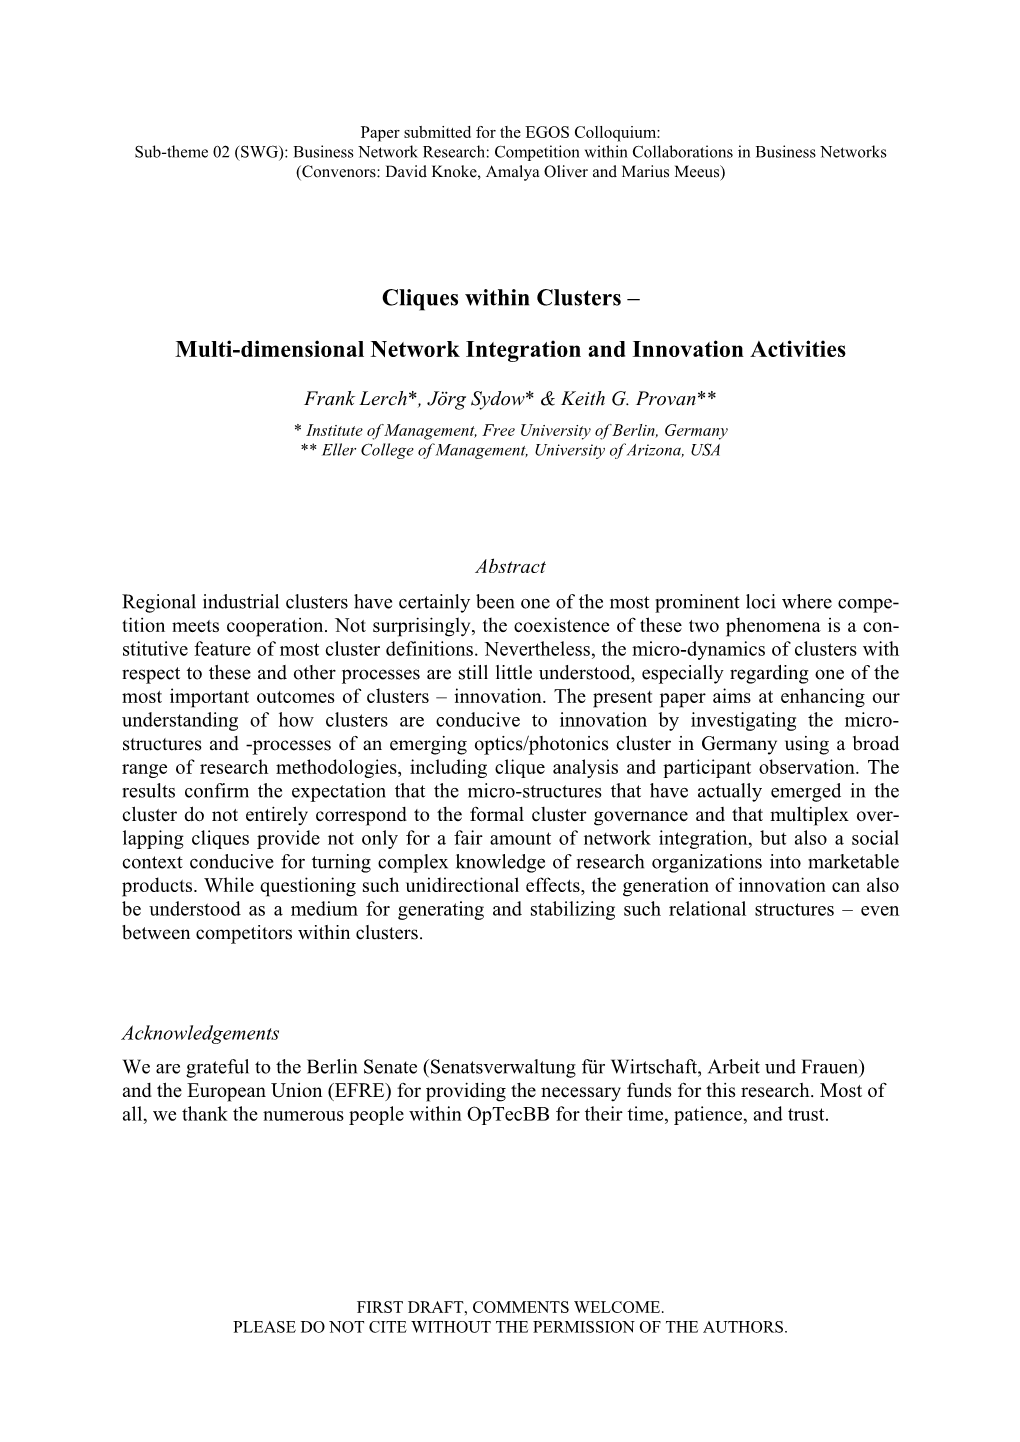 Cliques Within Clusters – Multi-Dimensional Network